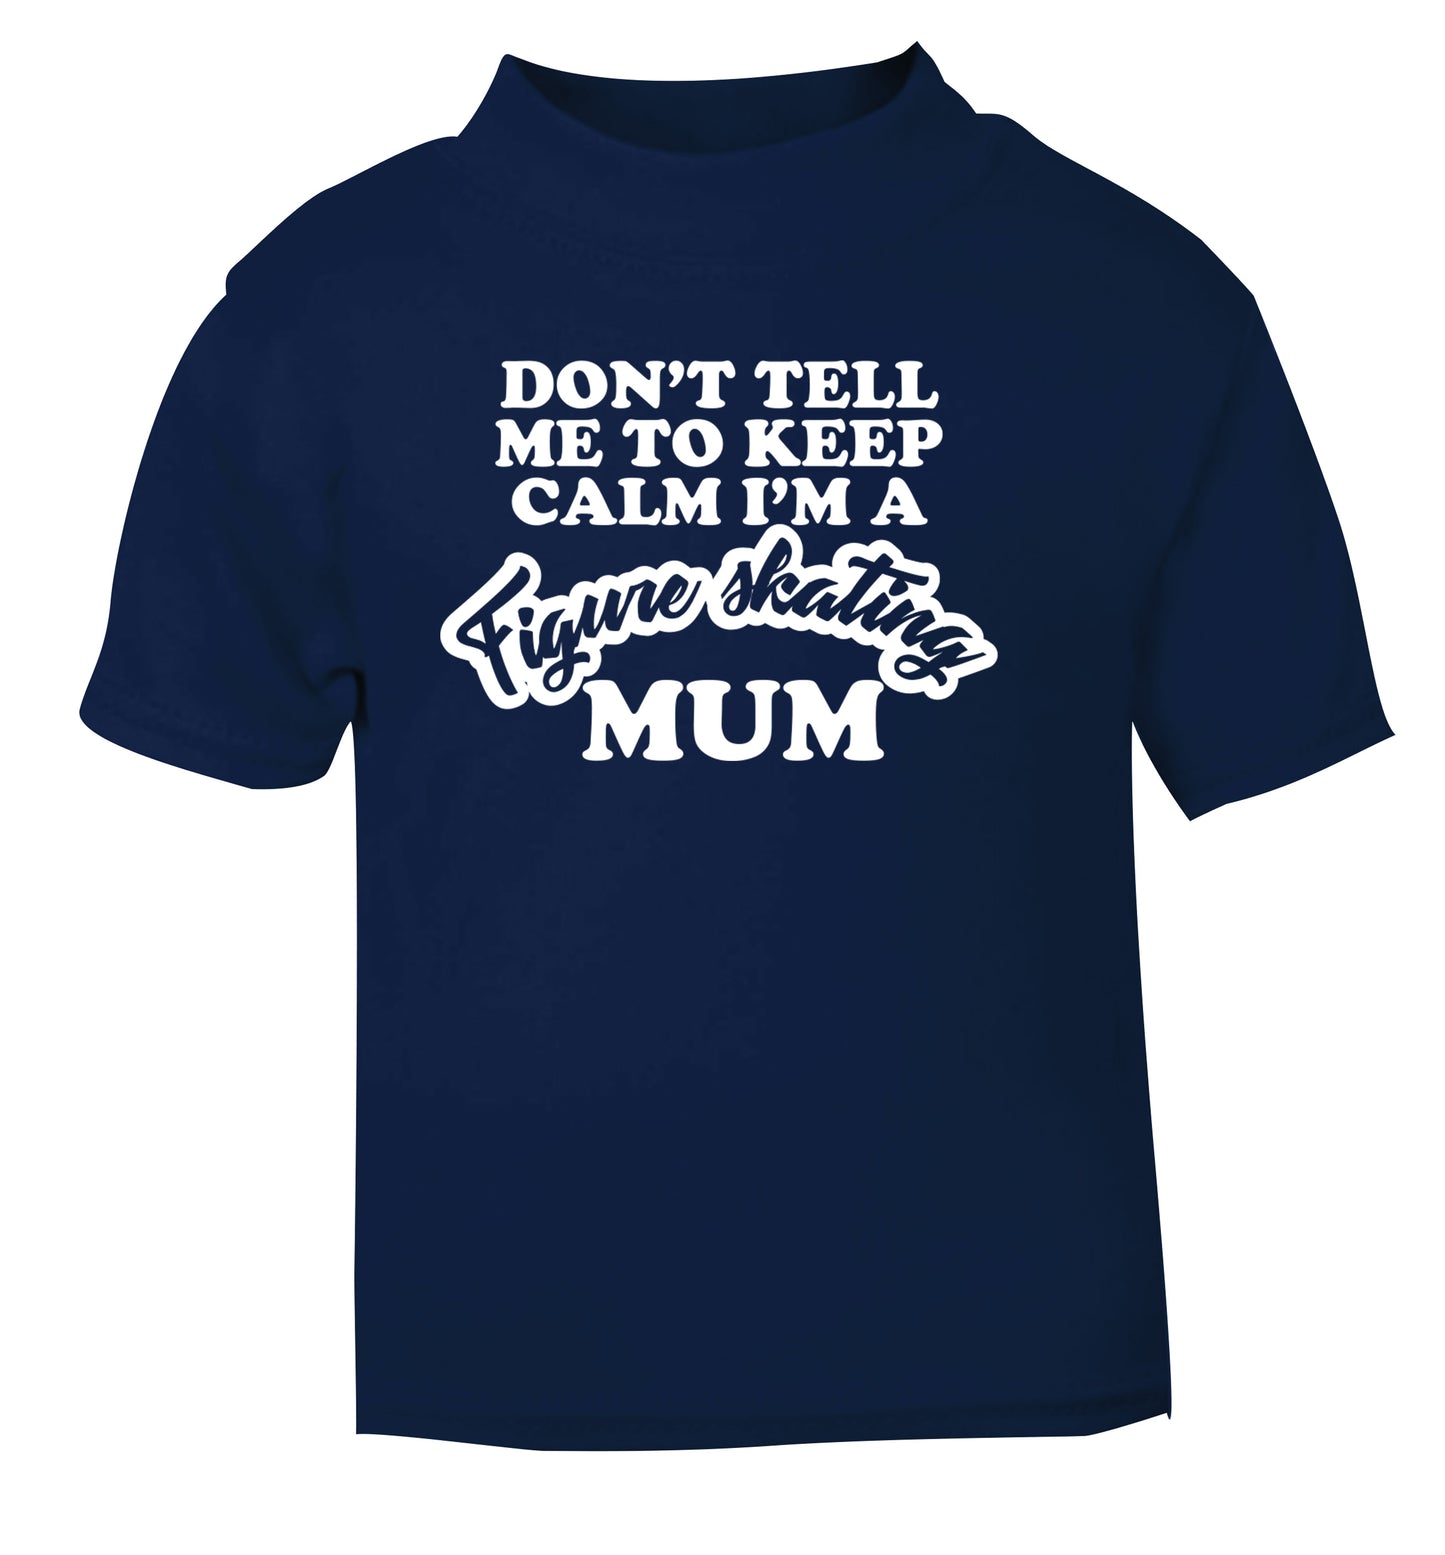 Don't tell me to keep calm I'm a figure skating mum navy Baby Toddler Tshirt 2 Years